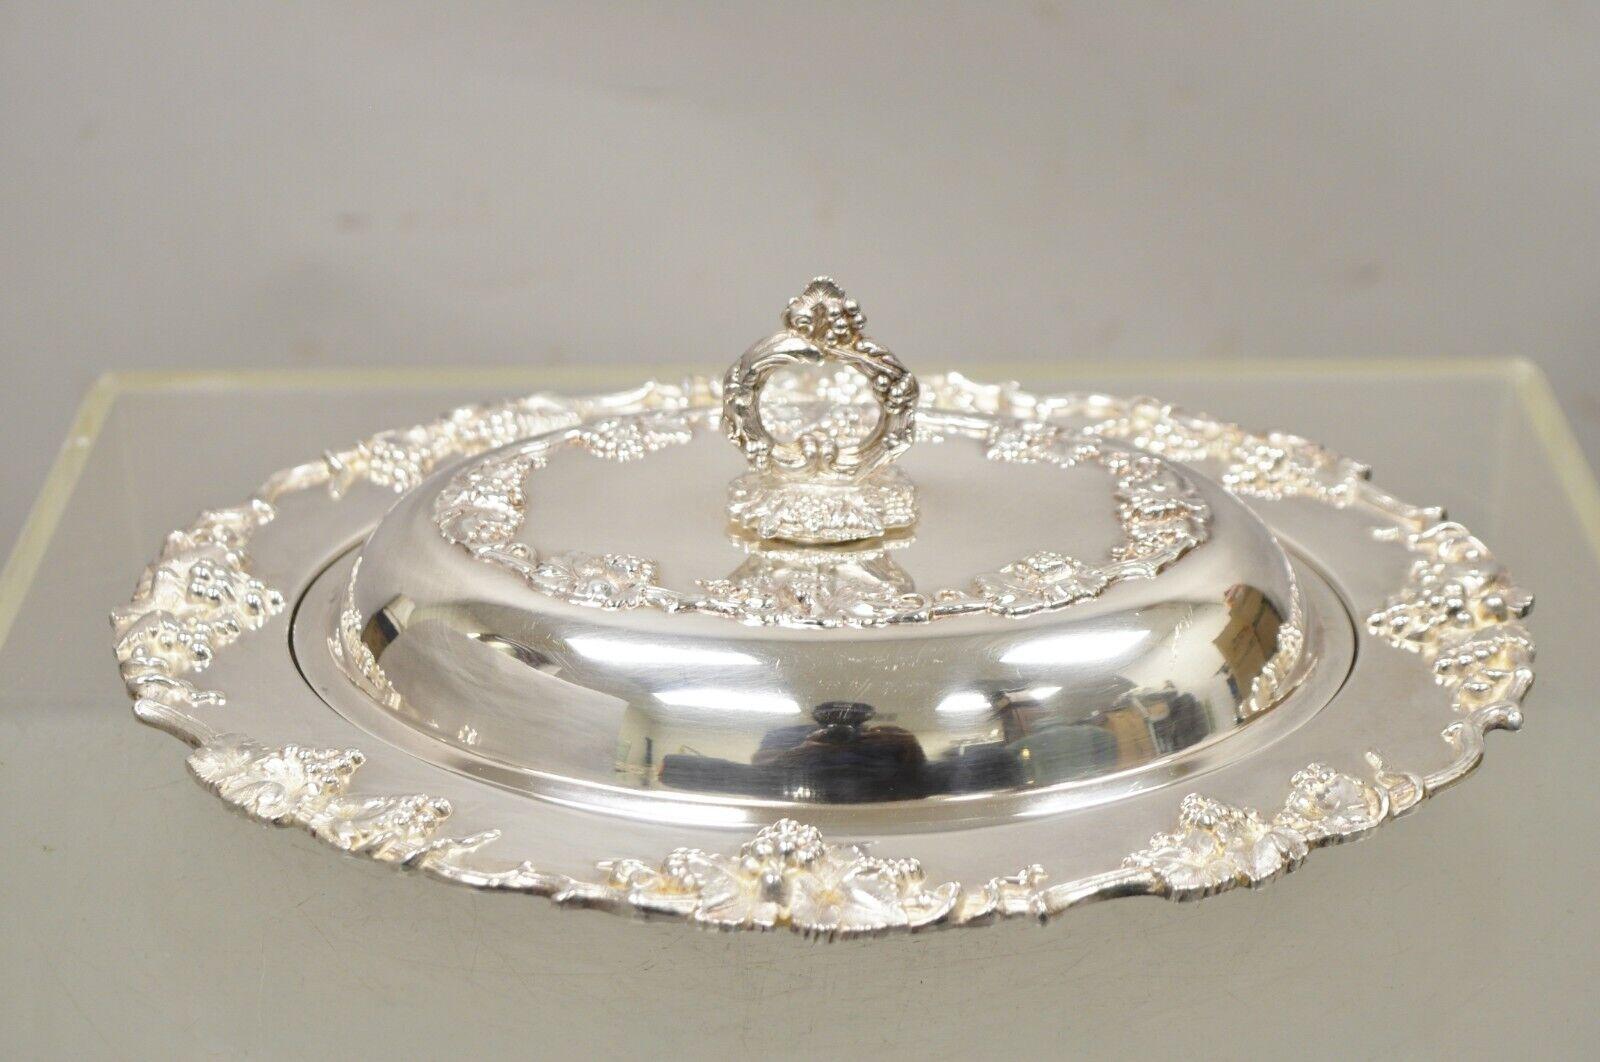 Vintage Victorian Style Grapevine & Grape Cluster Silver Plated Serving Platter Dish. Item features grapevine & grape cluster design, ornate handle with lid. Circa  Mid to Late 20th Century. Measurements: 4